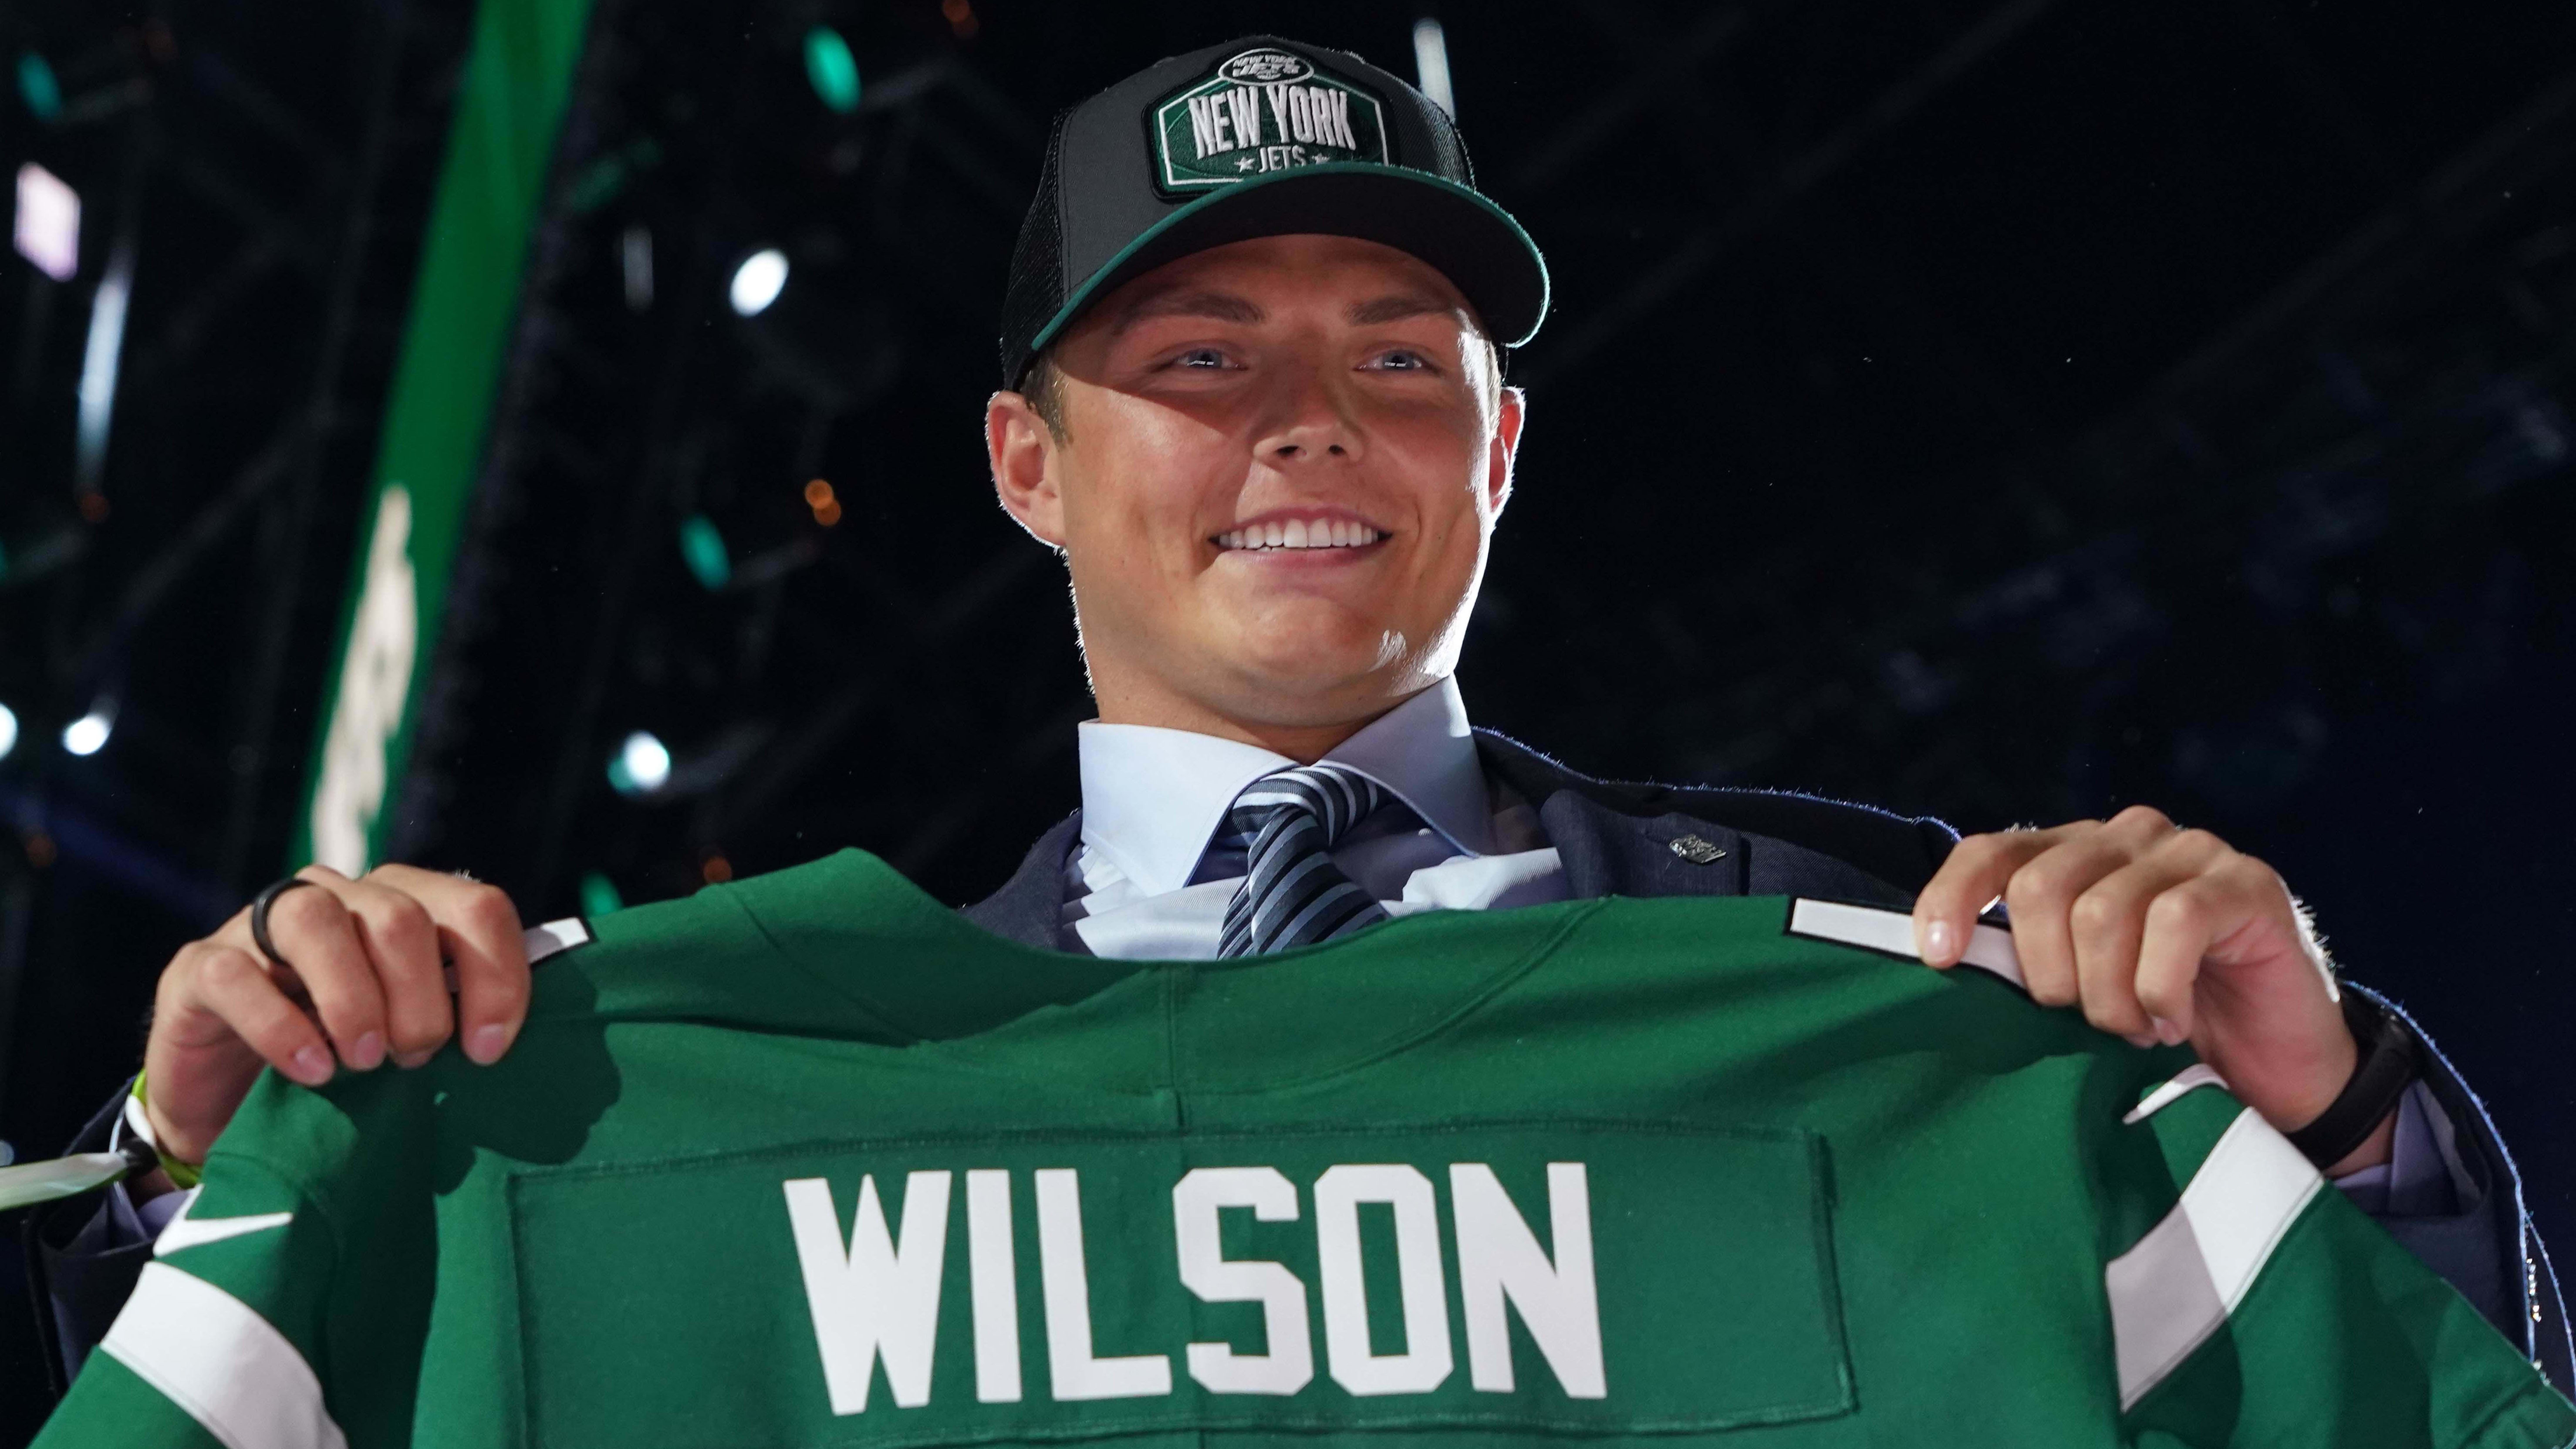 Zach Wilson with his Jets jersey on draft night in 2021